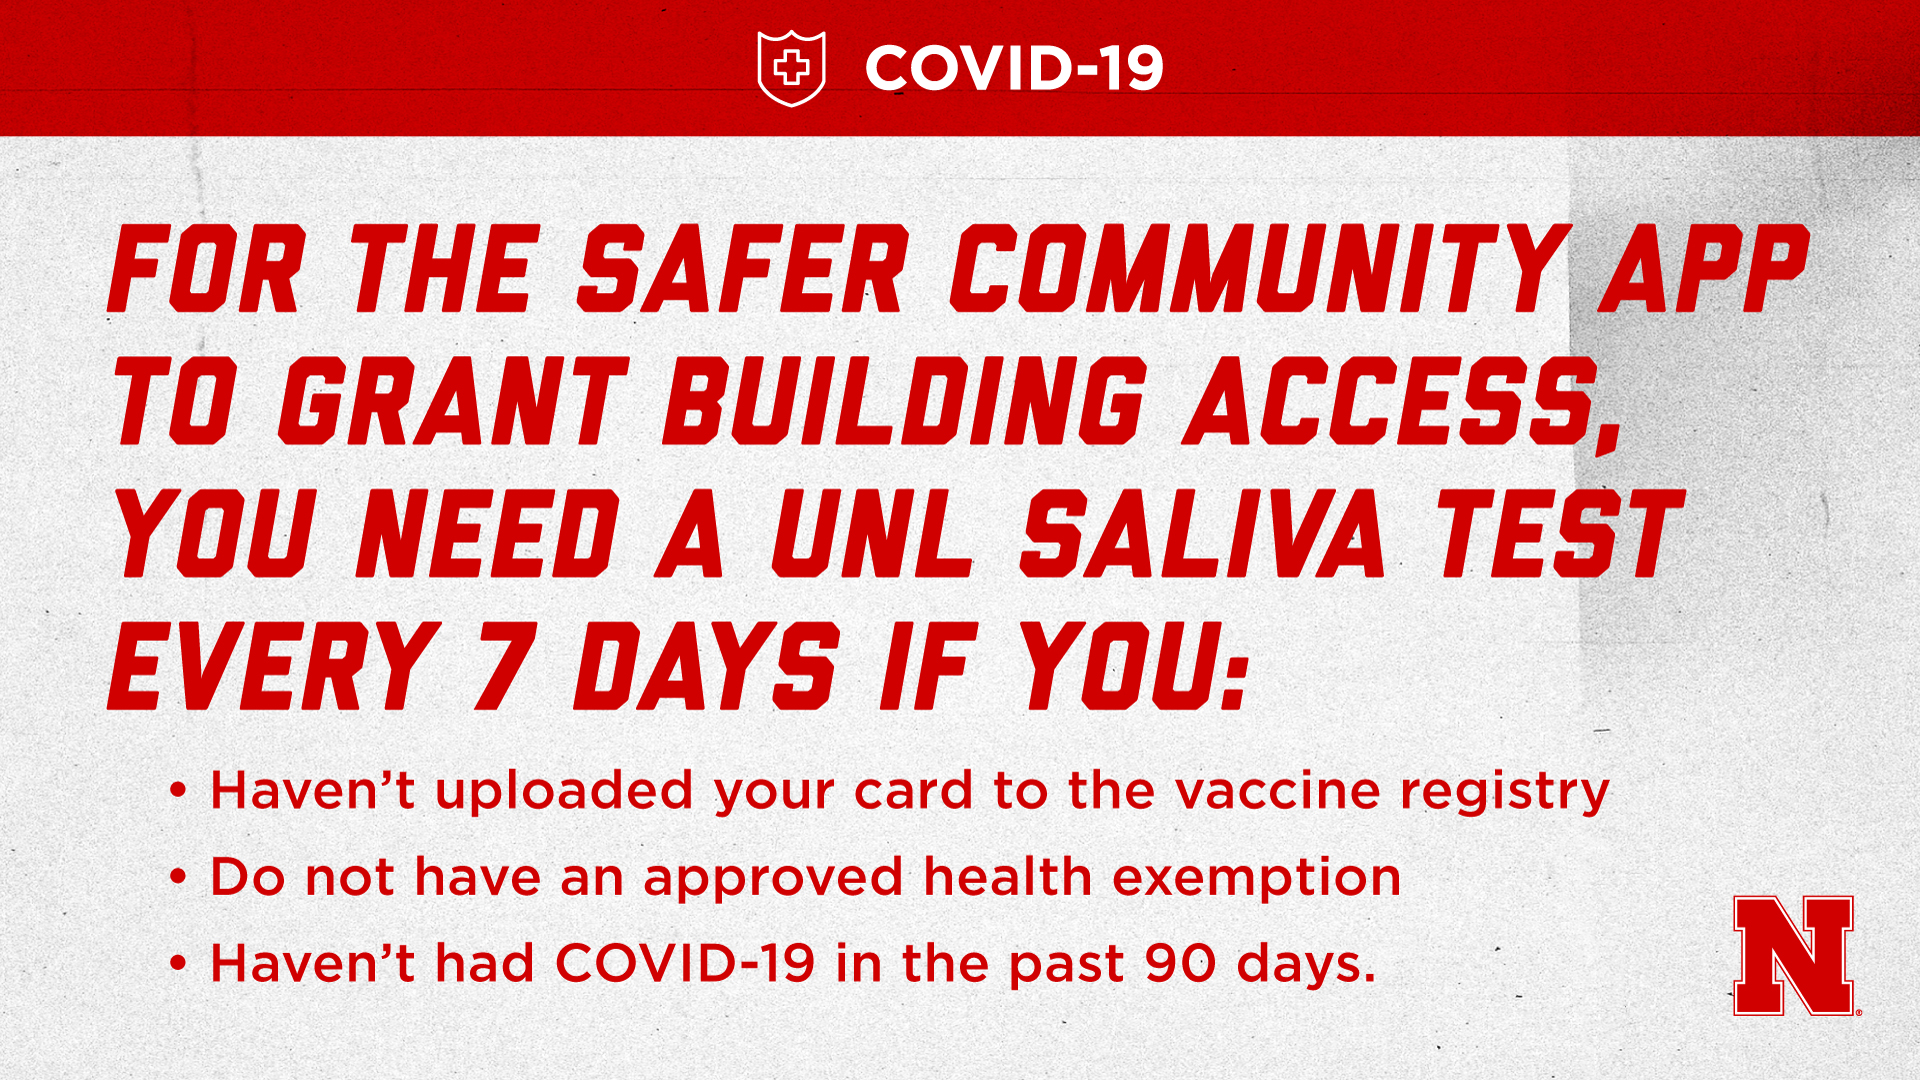 For the Safer Community App to grant building access, you need a UNL Saliva Test every 7 days if you: 1. Haven’t uploaded your card to vaccine registry; or 2. Do not have an approved health exemption; or 3. Haven’t had COVID-19 in the past 90 days.